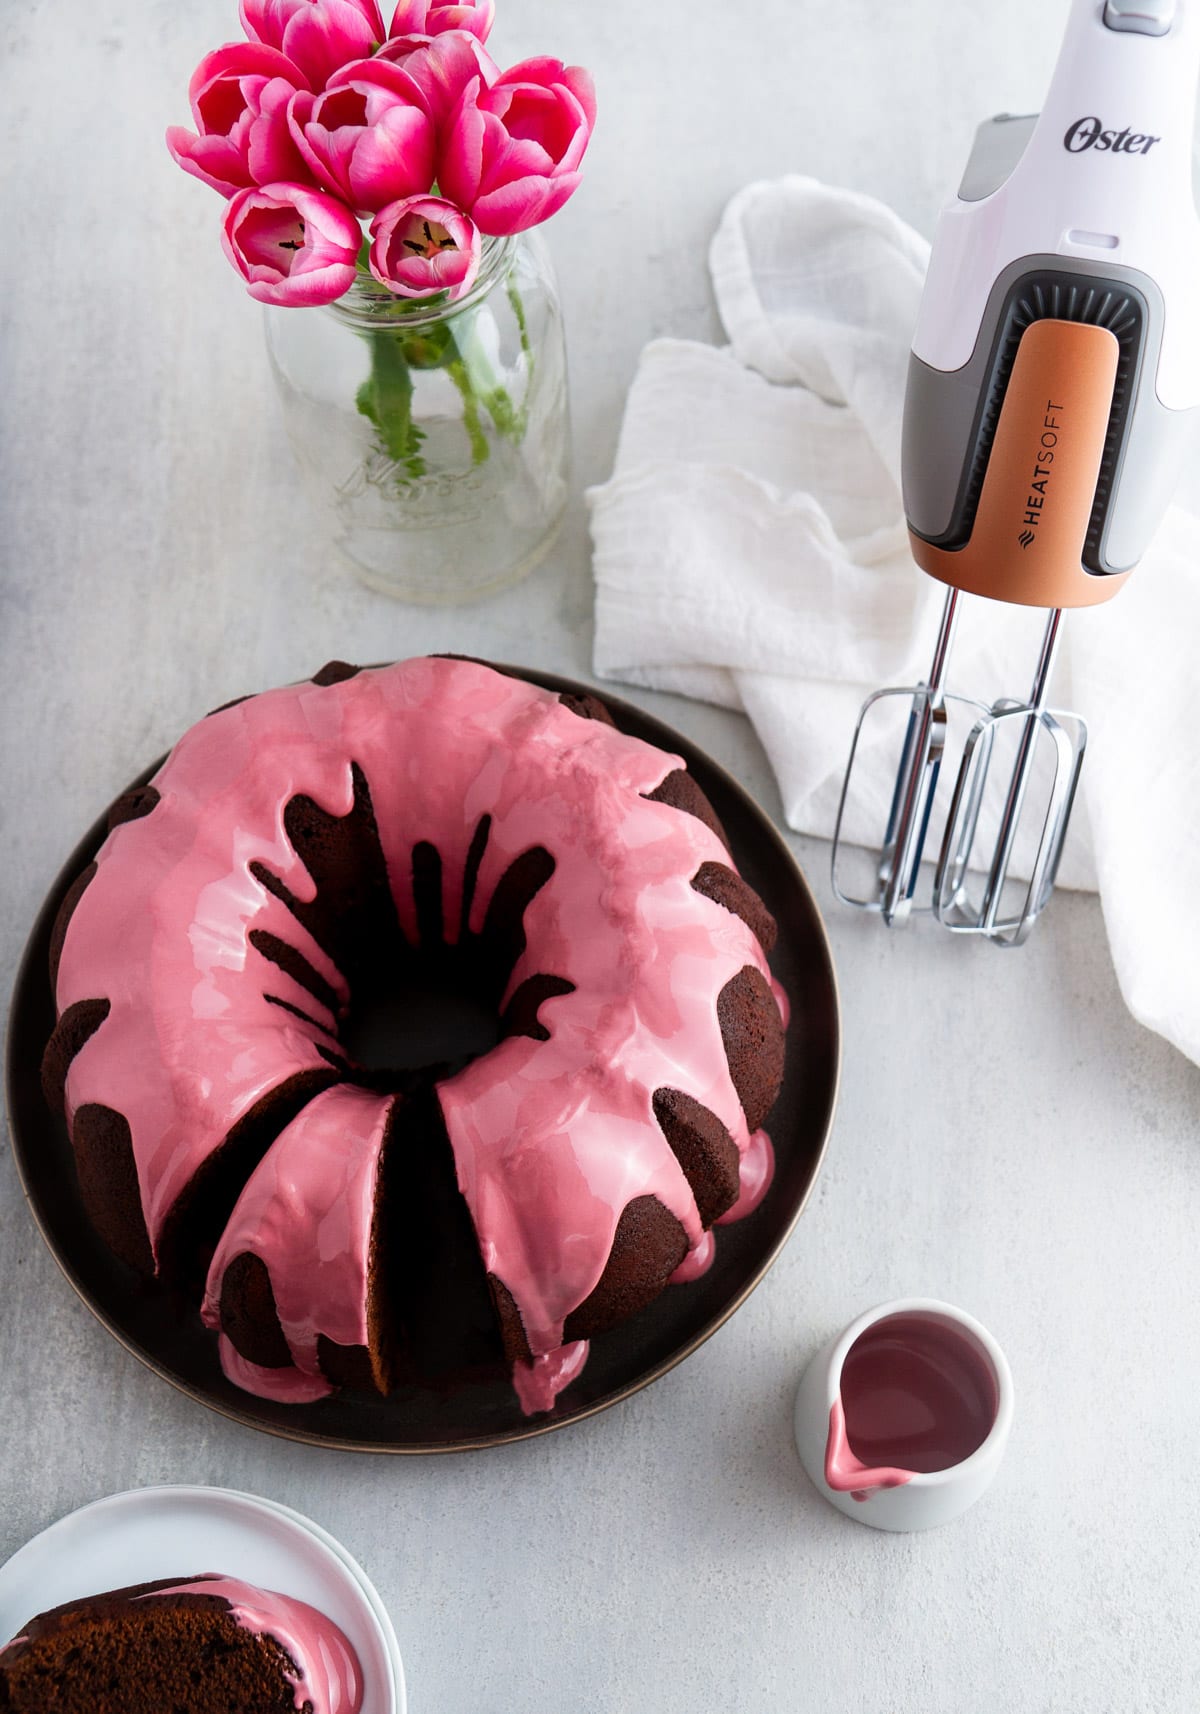 a chocolate bundt cake with ruby chocolate glaze on a plate with a hand mixer and flowers next to it